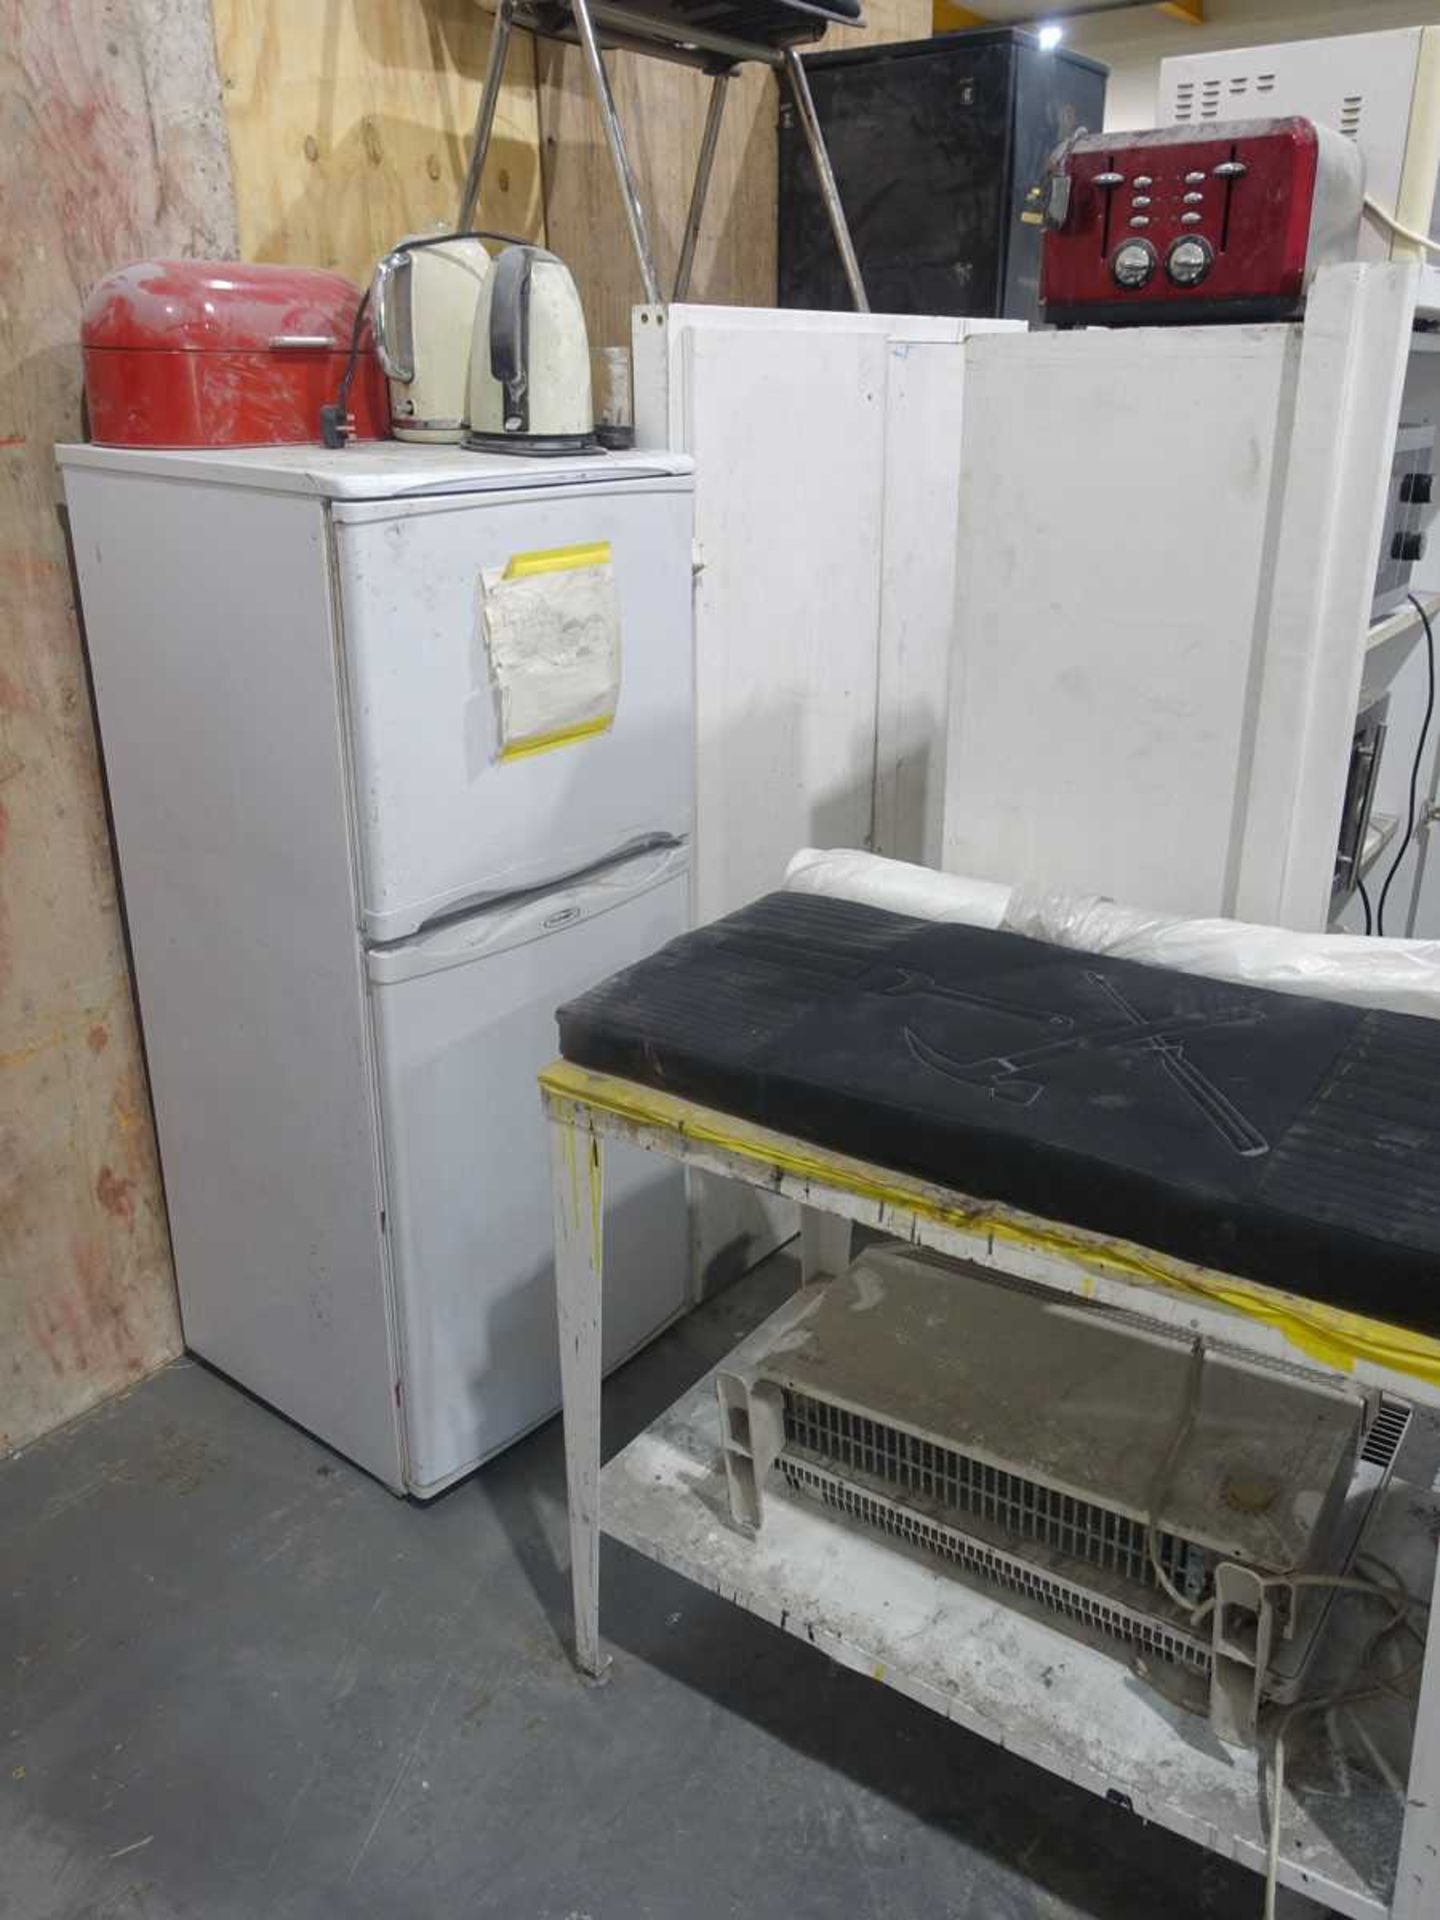 +VAT Miscellaneous appliances and furniture, including fridge freezer, microwaves, office chairs, - Image 5 of 5